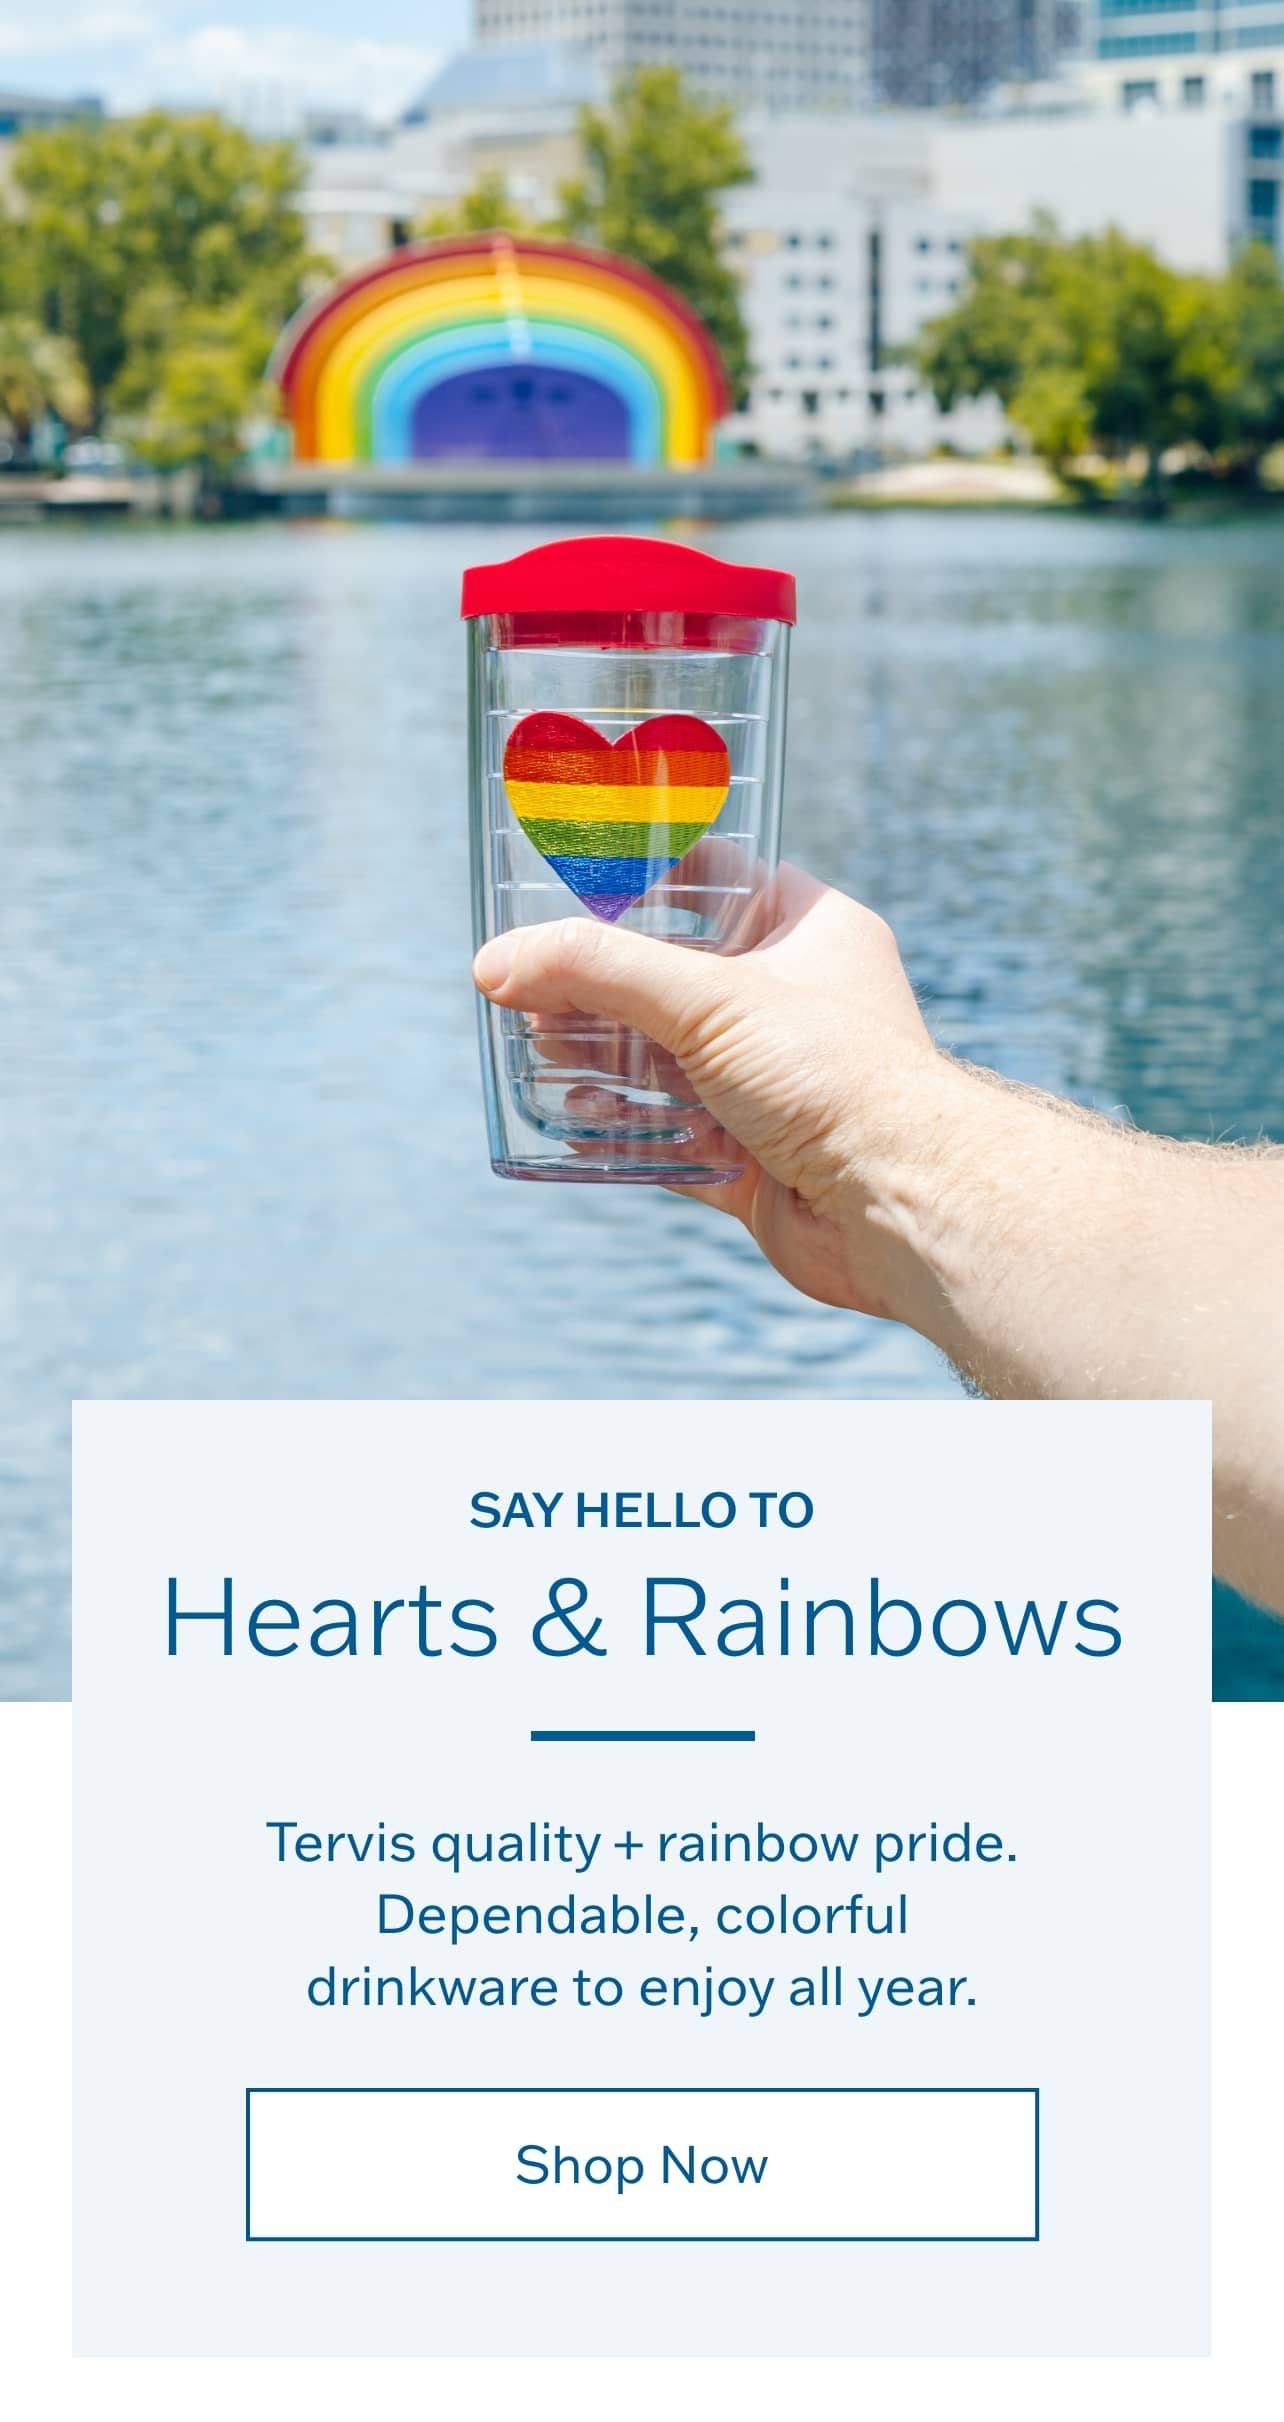 Say hello to hearts and rainbows. Tervis quality + rainbow pride. Dependable, colorful drinkware to enjoy all year. Shop Now